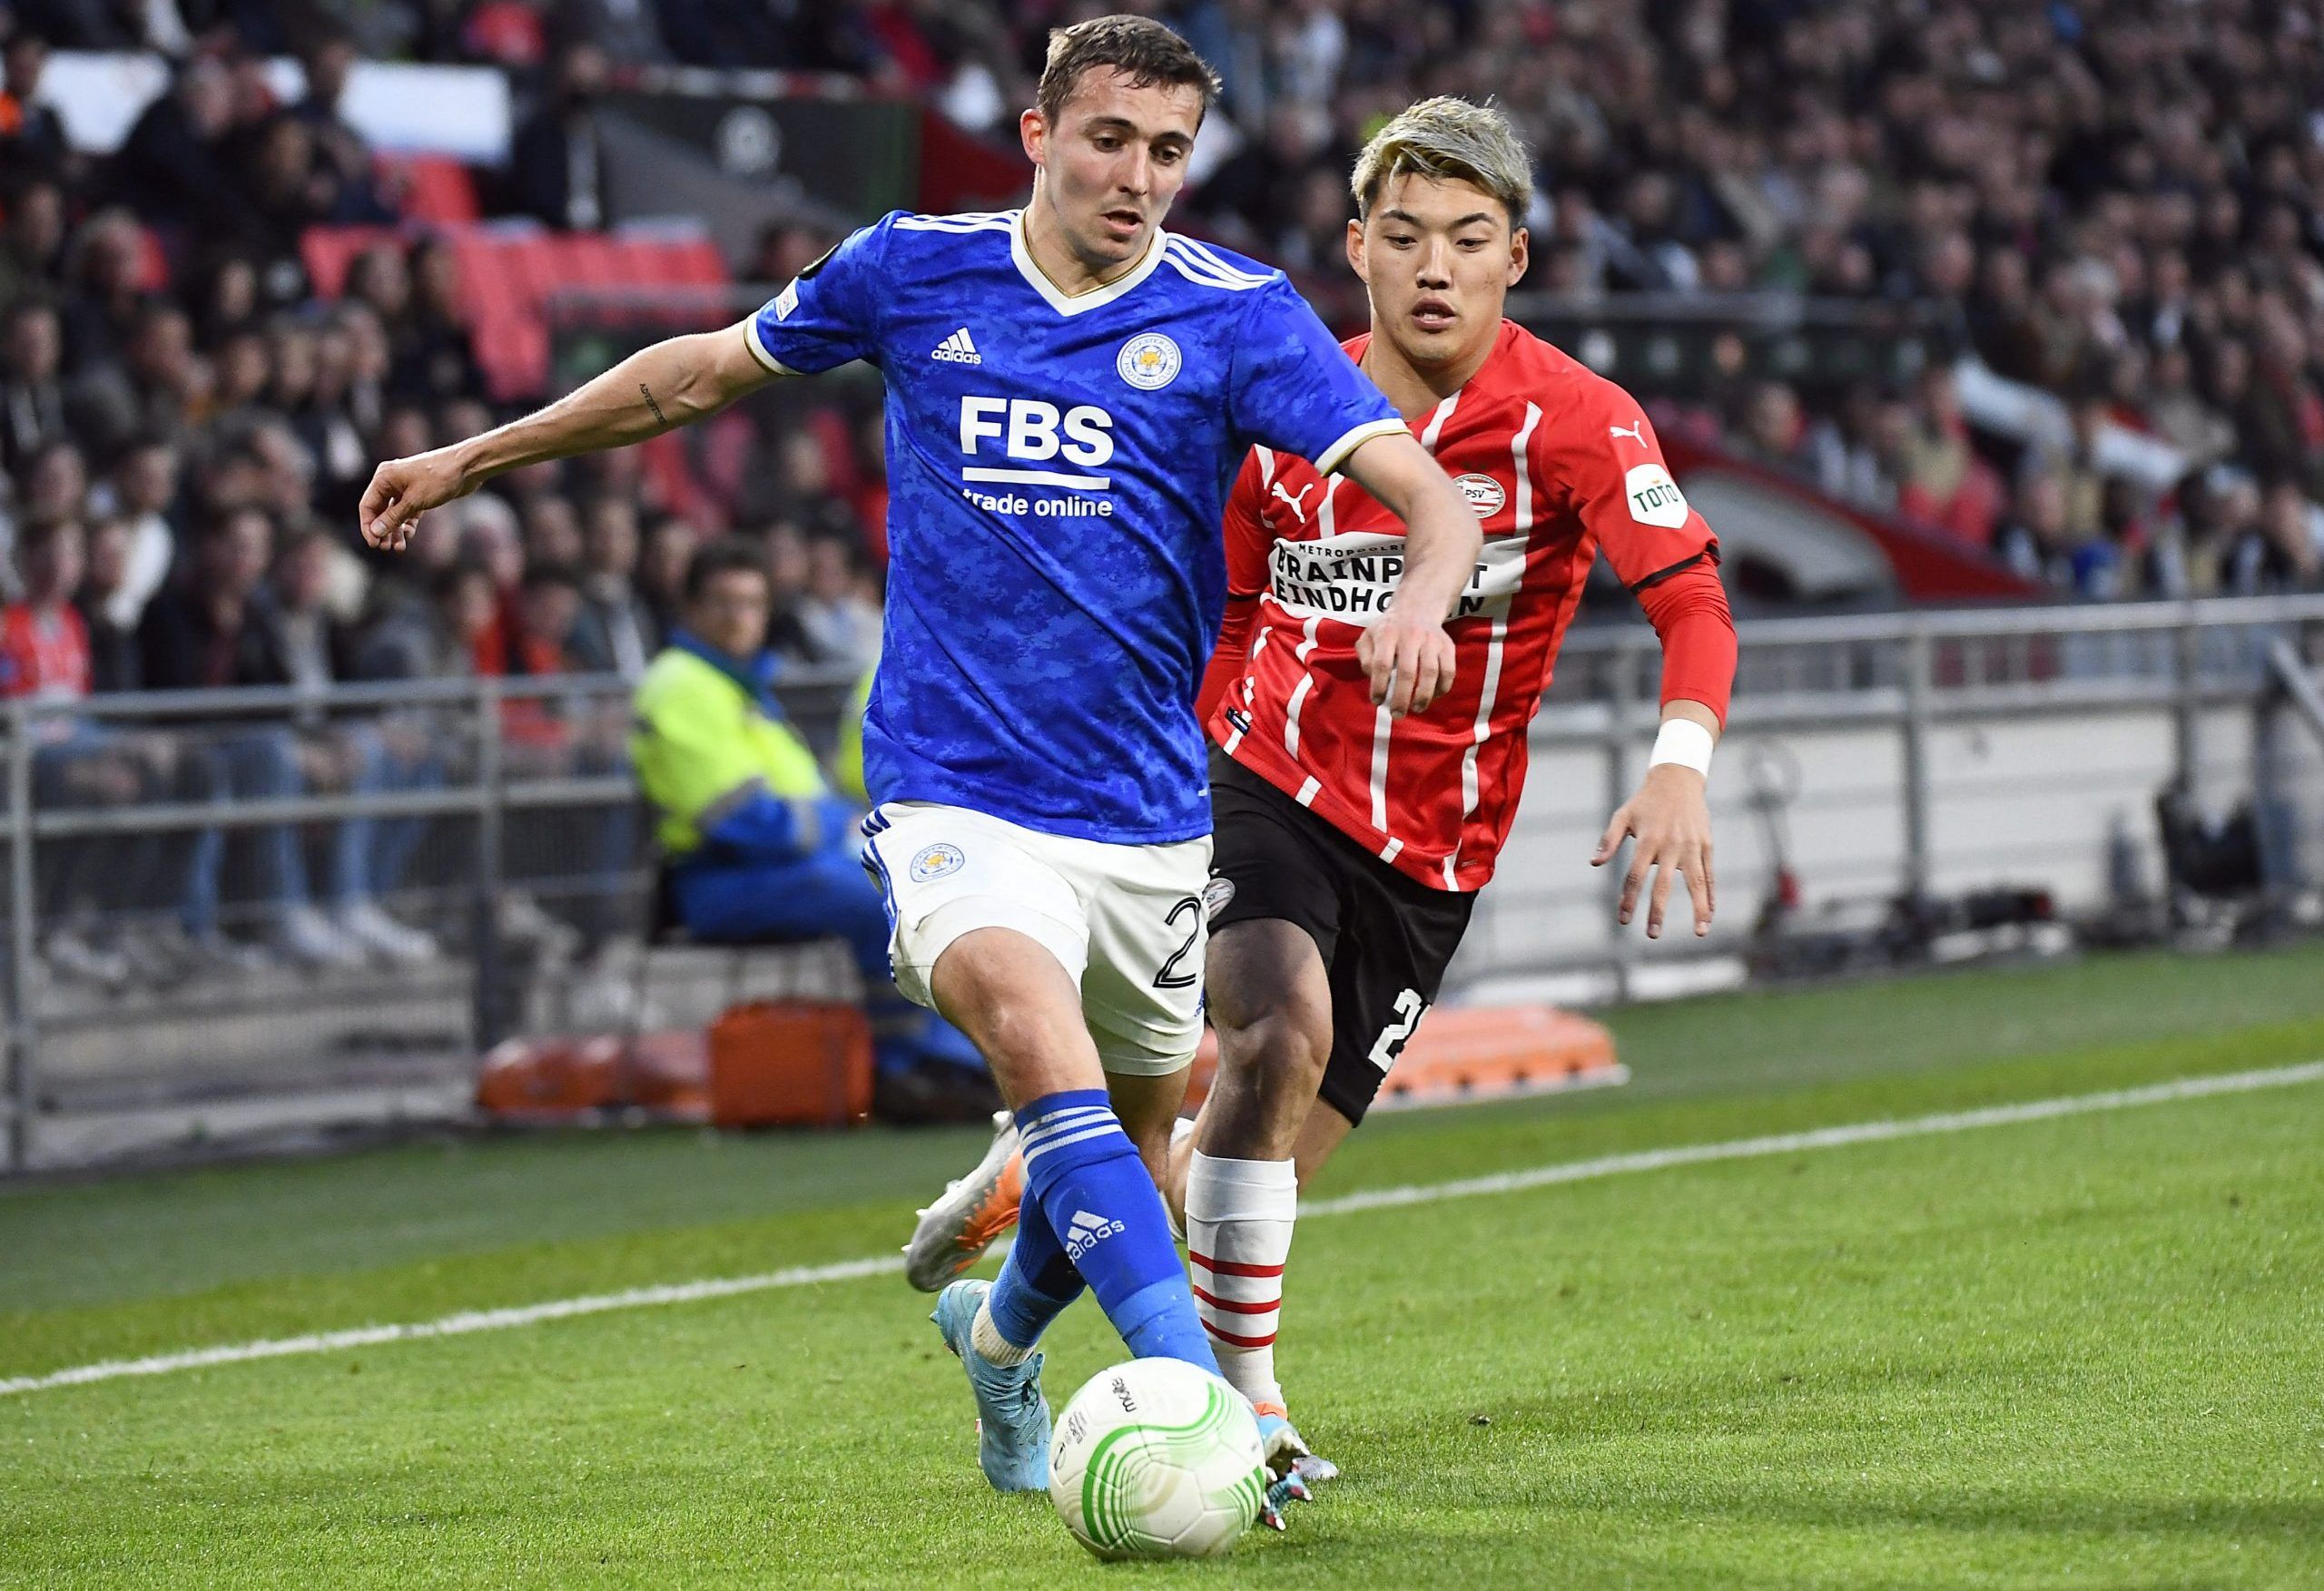 Soccer Football - Europa Conference League - Quarter Final - Second Leg - PSV Eindhoven v Leicester City - Philips Stadion, Eindhoven, Netherlands - April 14, 2022 Leicester City's Timothy Castagne in action with PSV Eindhoven's Ritsu Doan REUTERS/Piroschka Van De Wouw